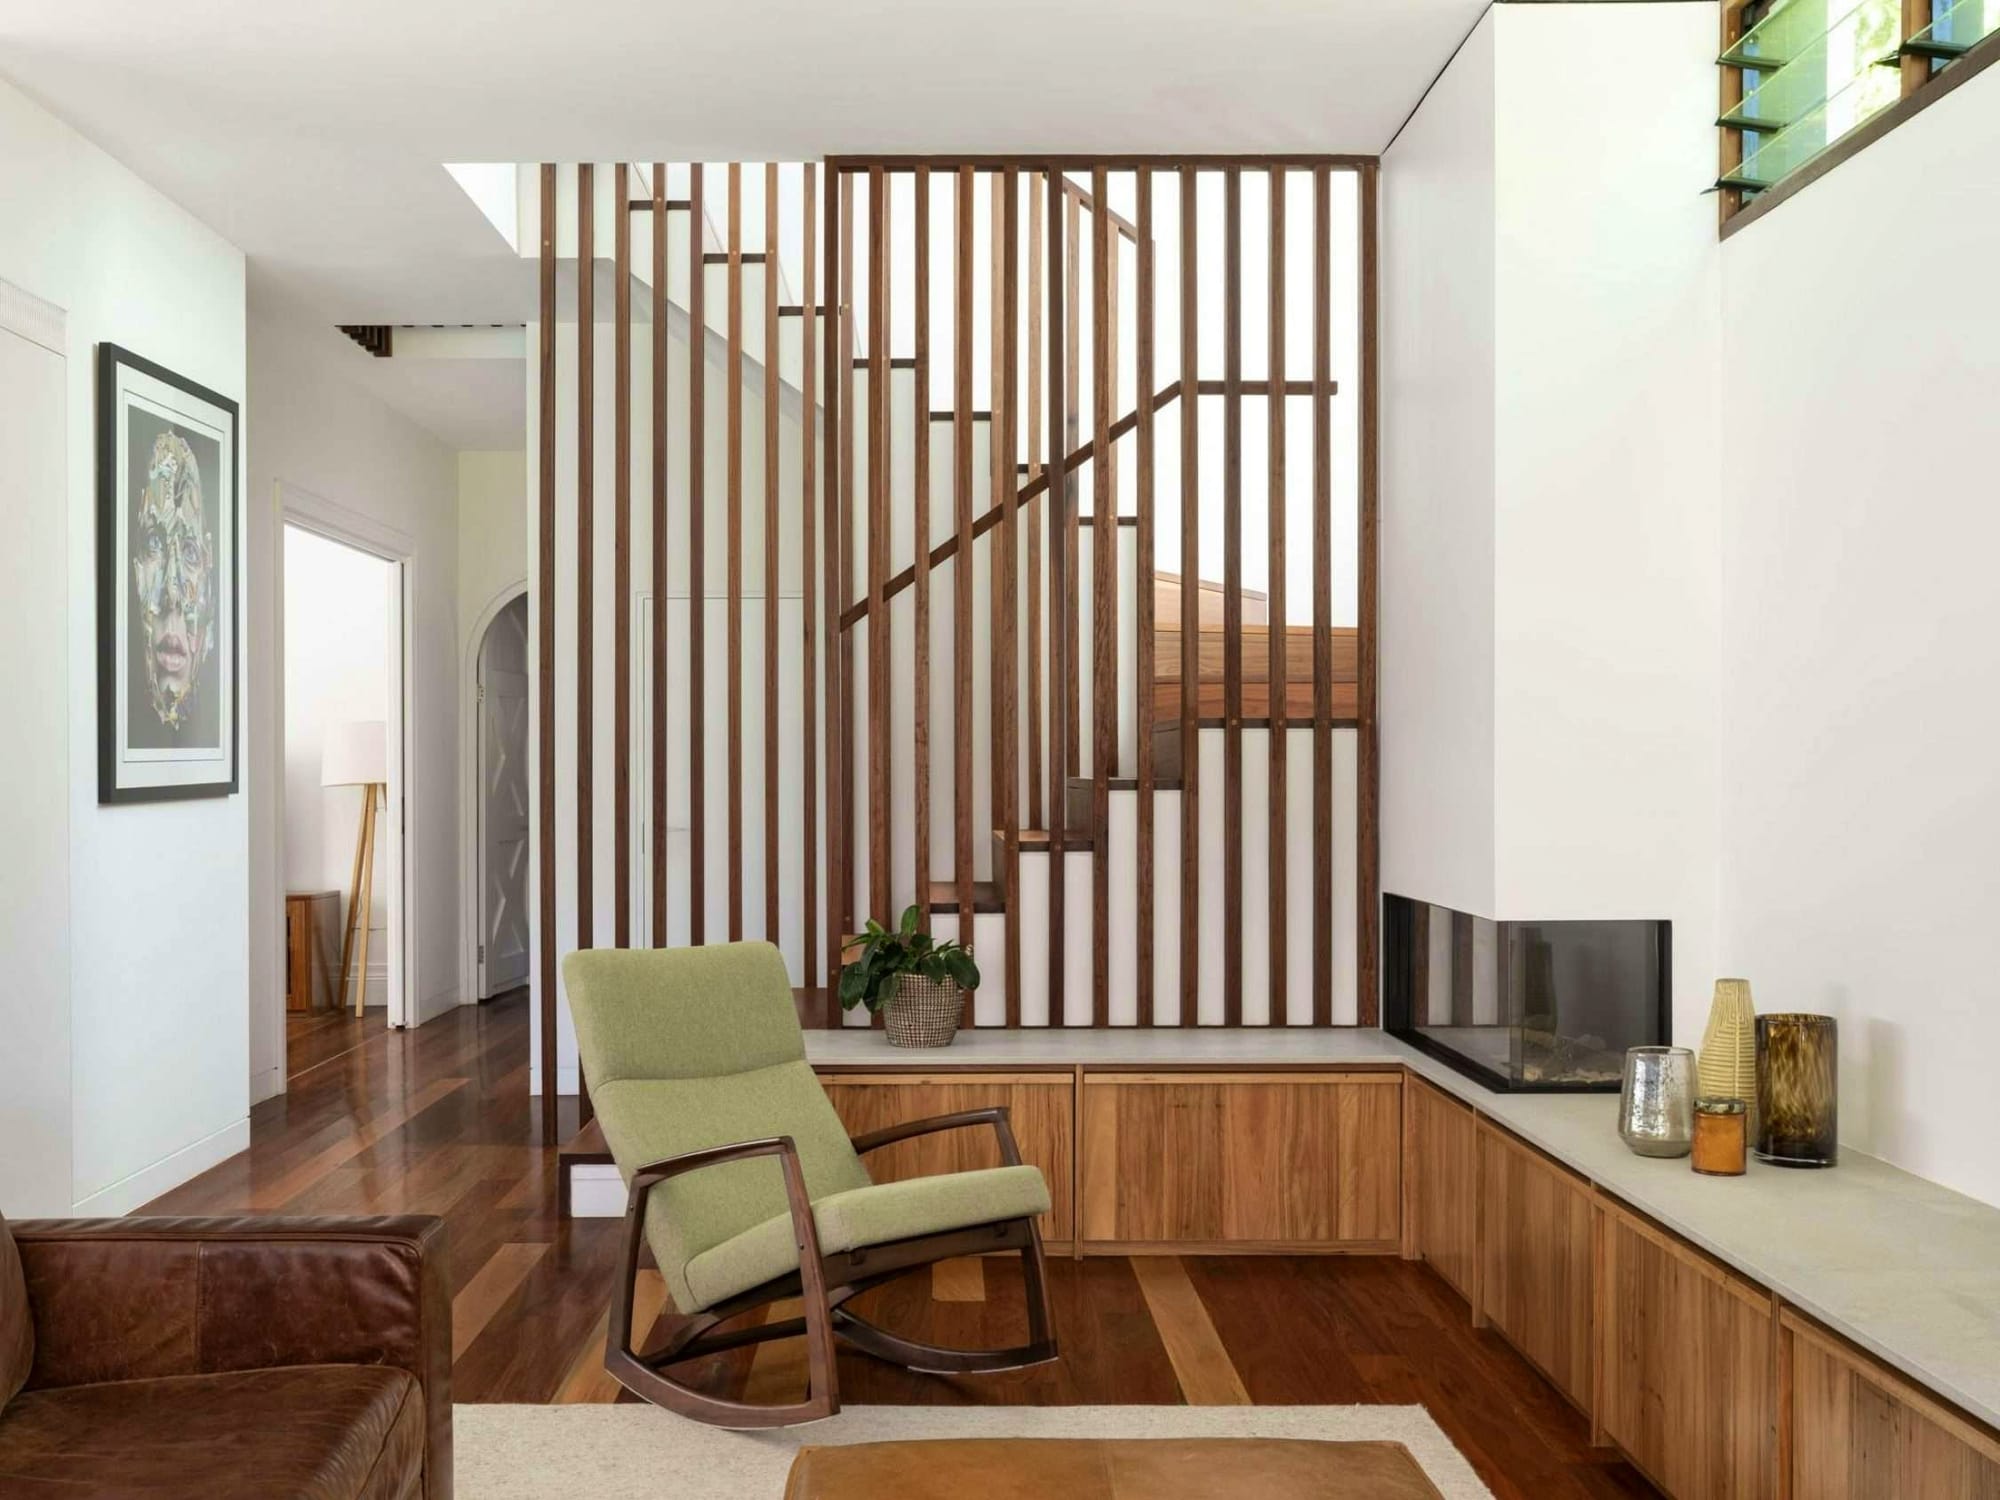 Surgo House by BILJ Architecture. Photography by Tom Ferguson. Mid-century modern living space with timber floors, cabinetry and dividing wall. Sage and walnut ricking hair. 